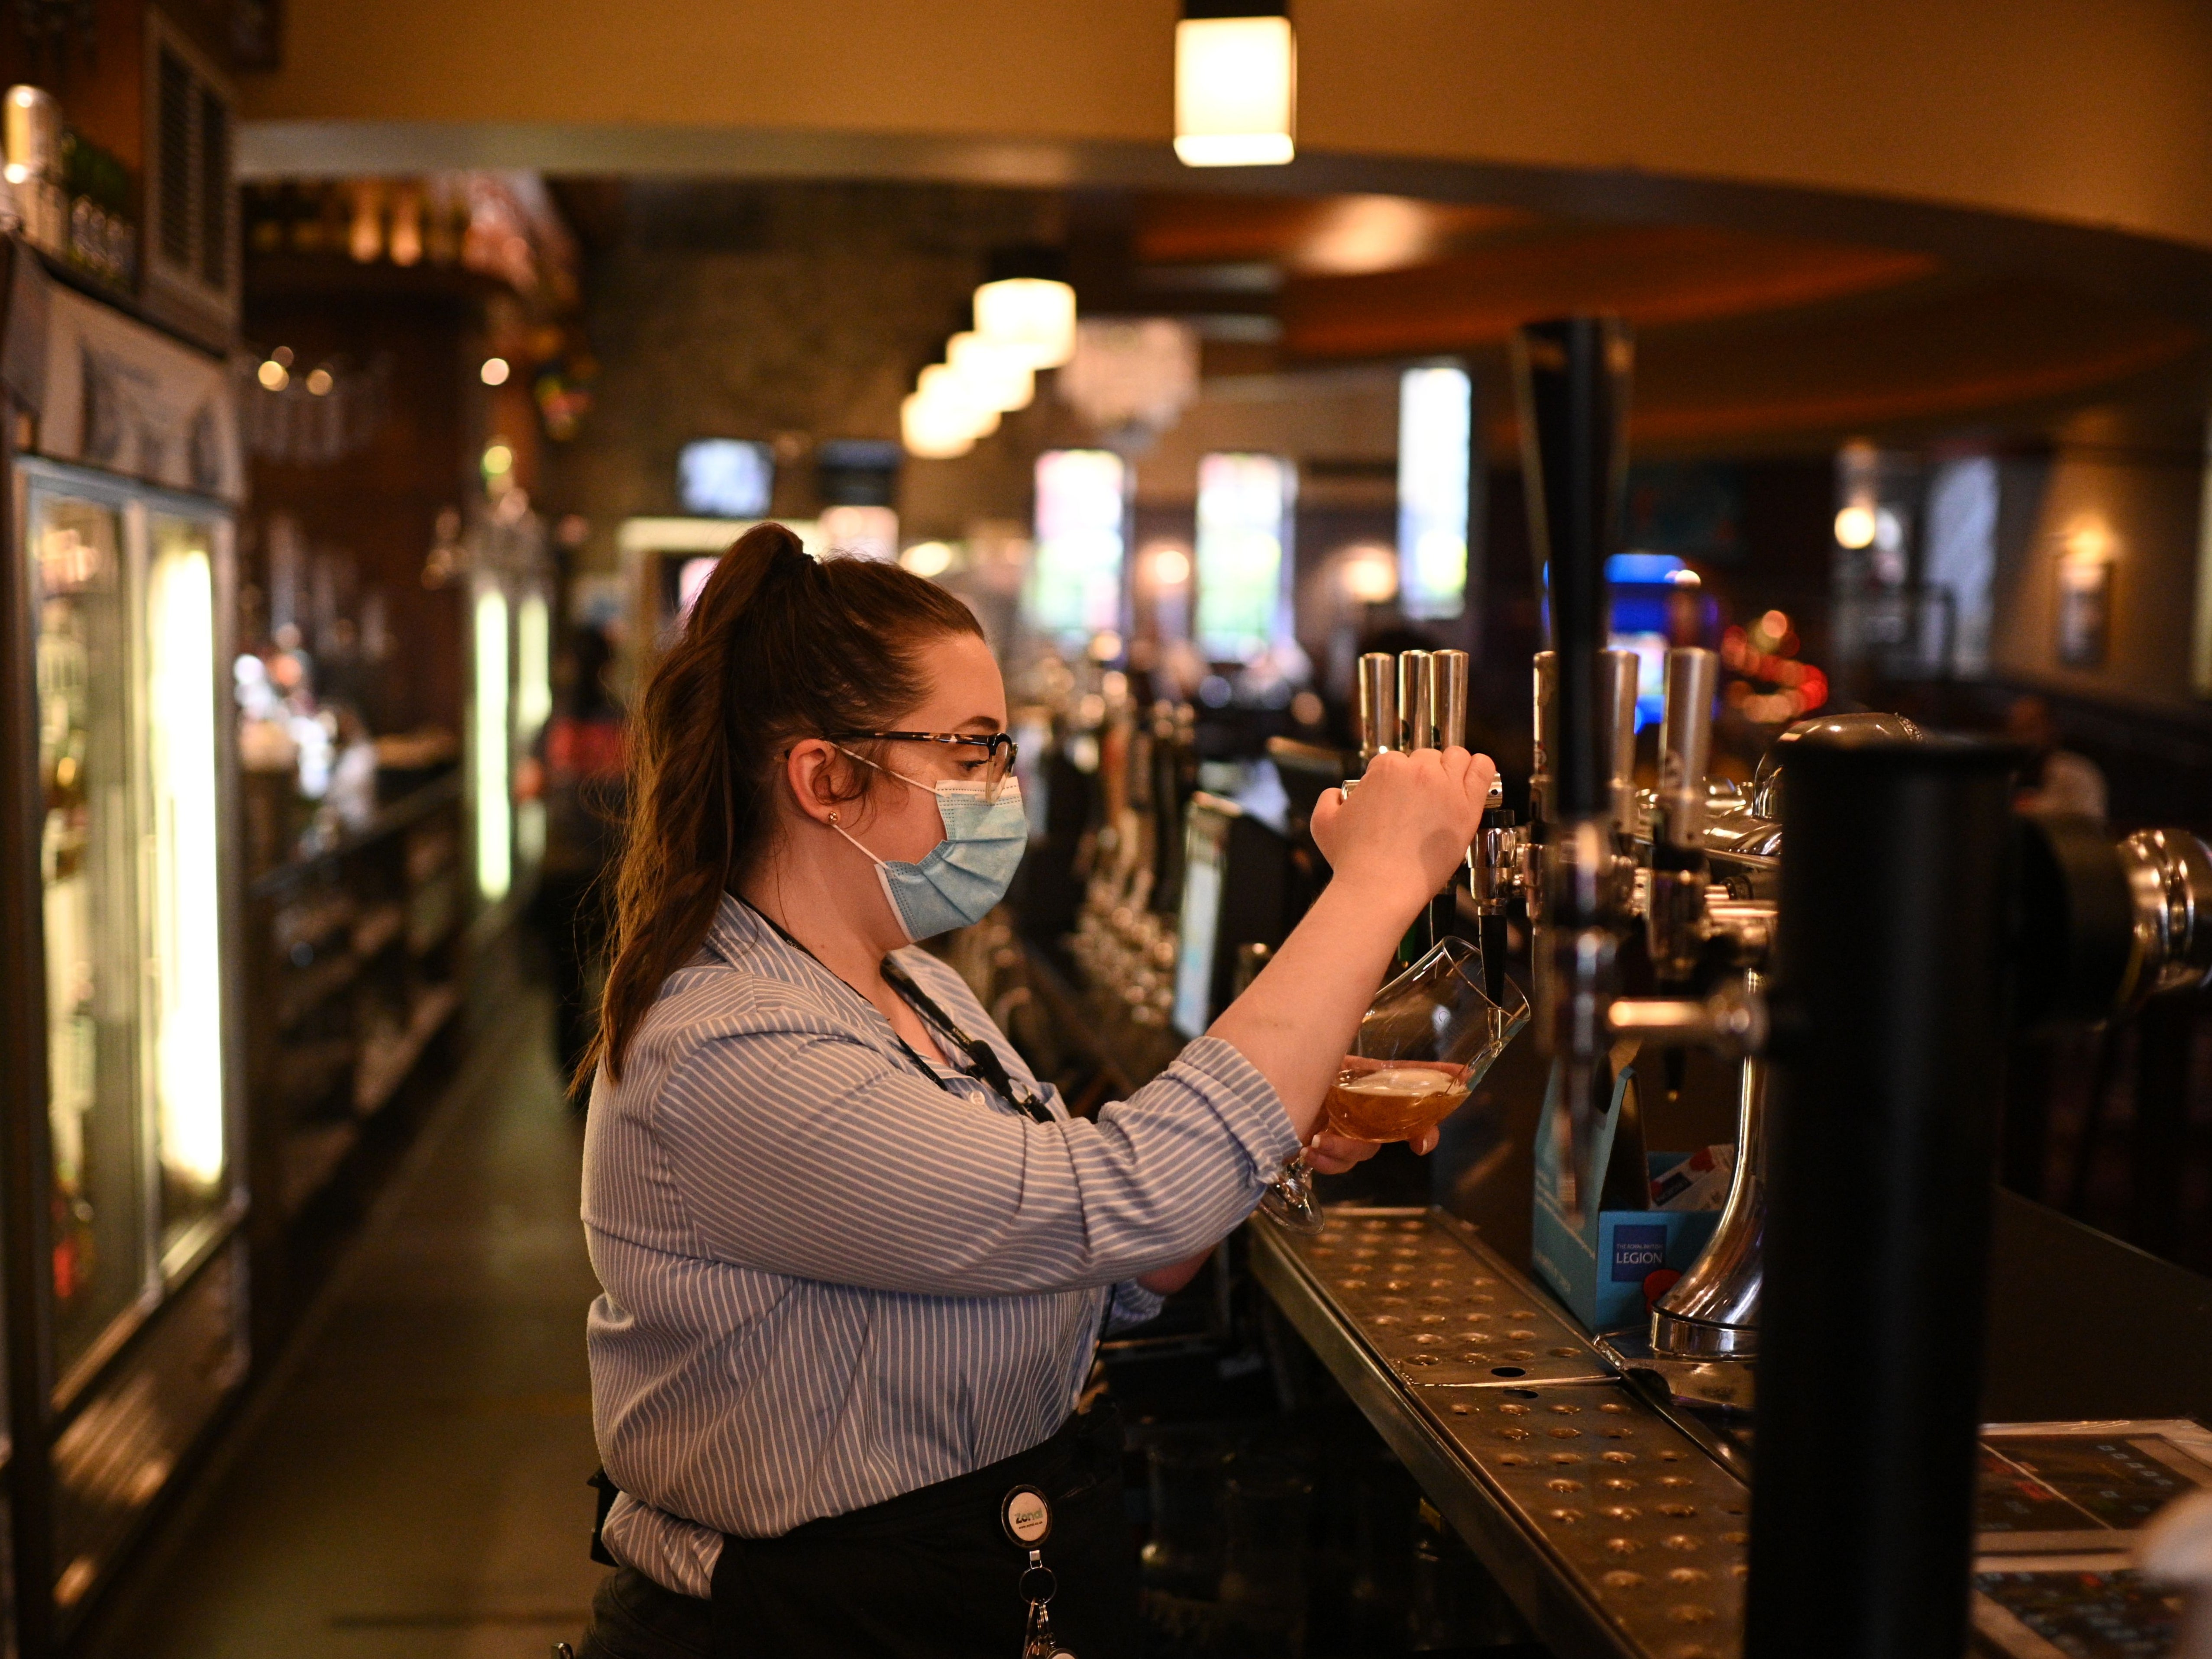 A member of staff pulls a pint in a Wetherspoons pub